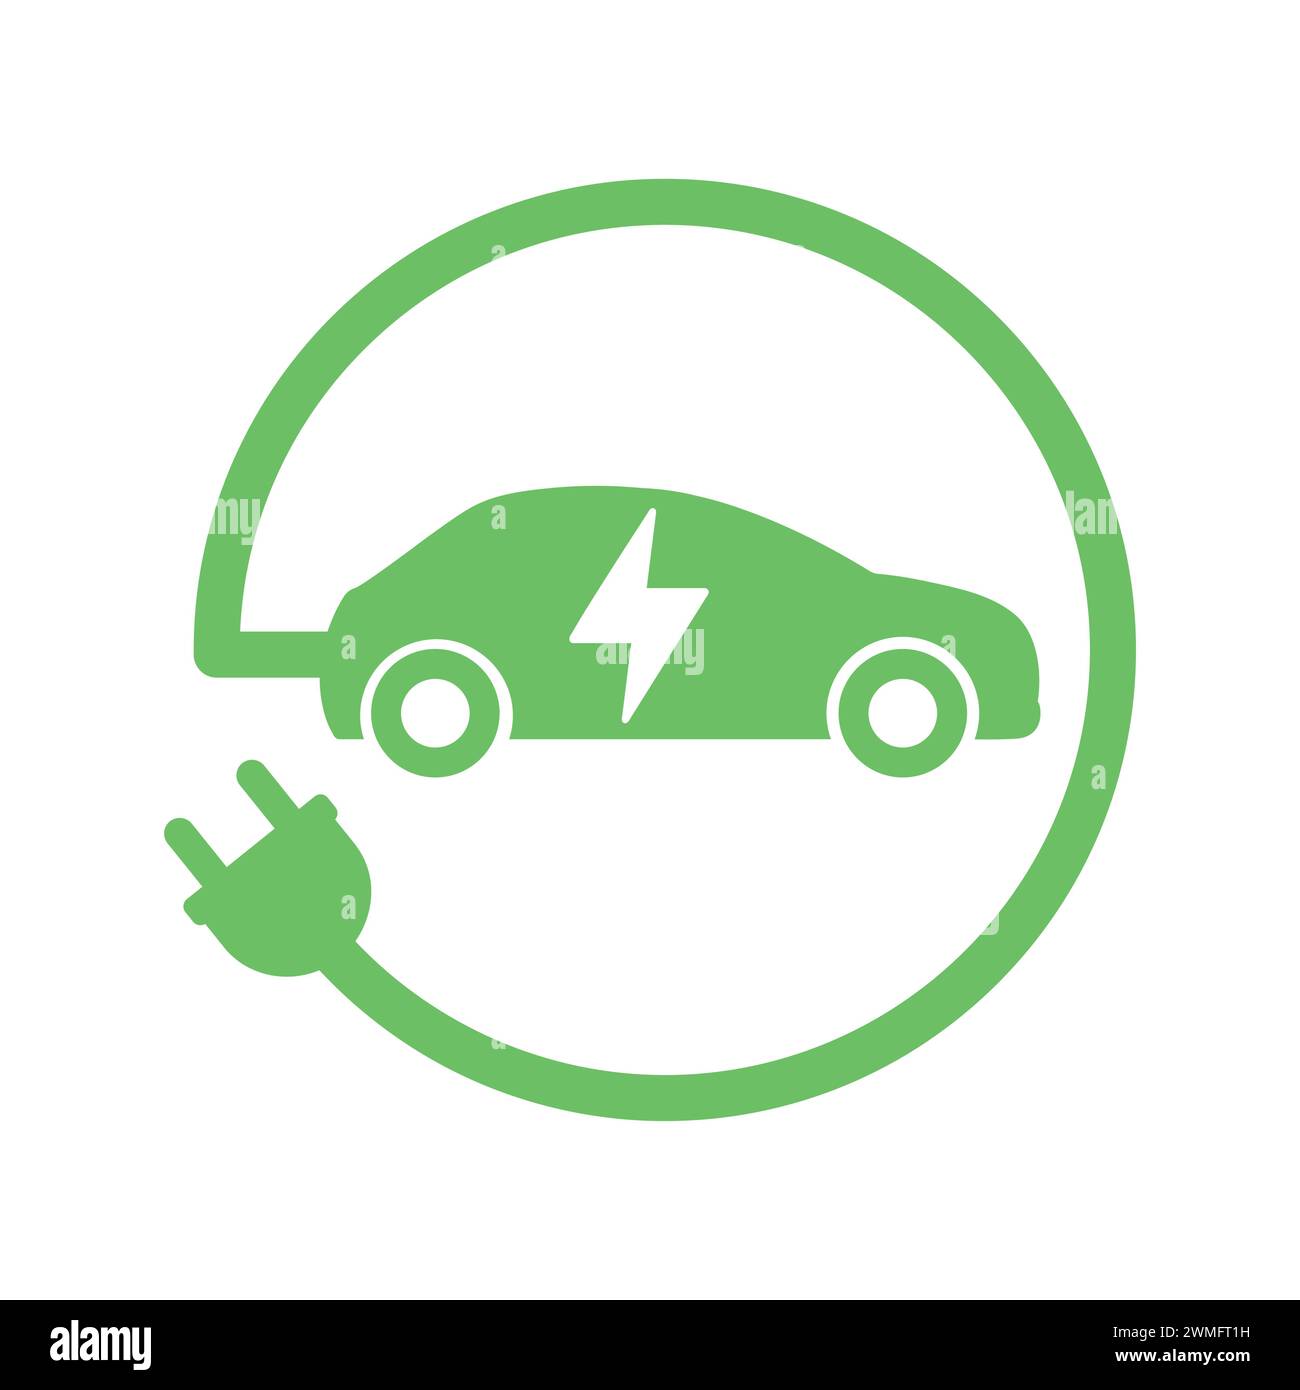 Green Electric Car With Plug Charging Symbol. Electric Vehicle Icon. EV Cars Icons. Charging Station Road Sign. Renewable Eco Technologies Stock Vector